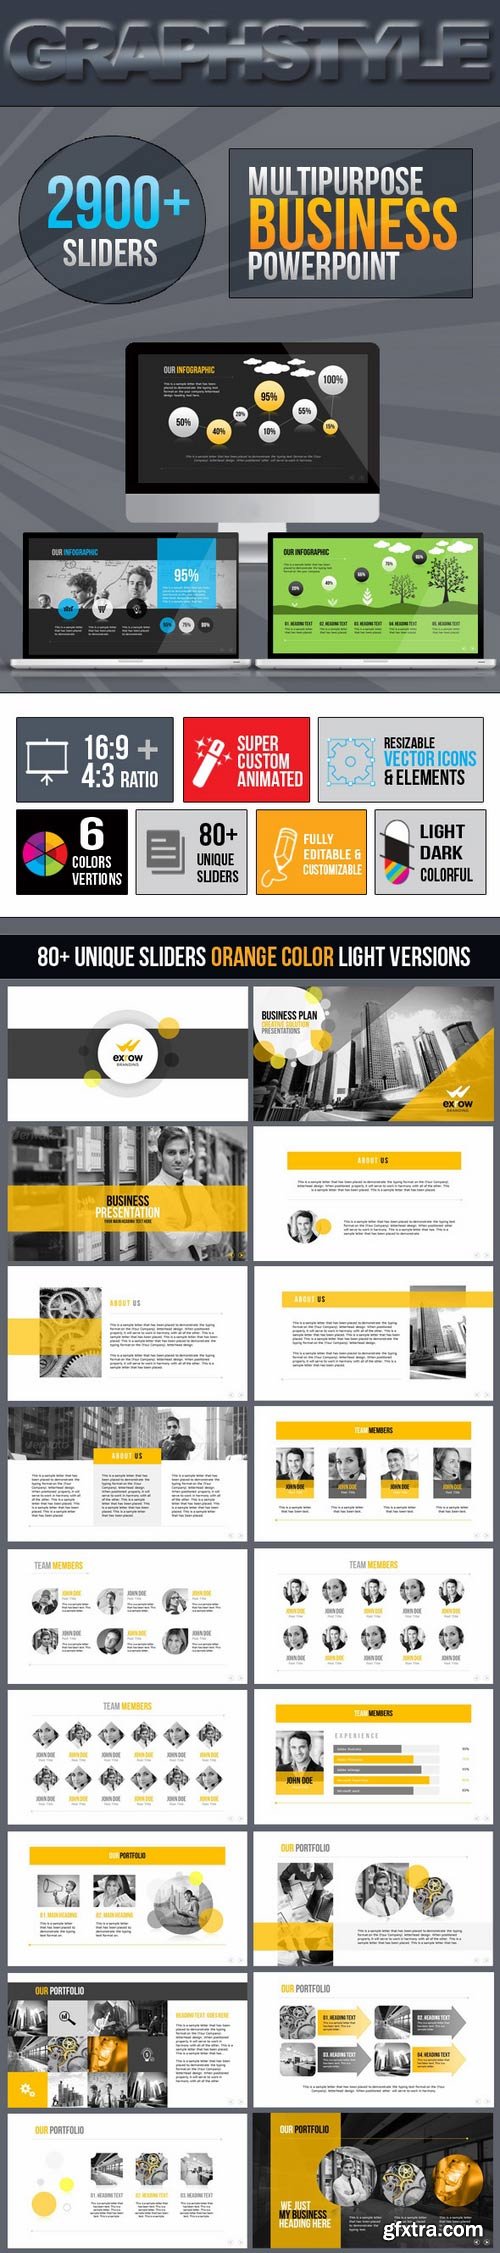 GraphicRiver - Exrow_Business PowerPoint 8145191